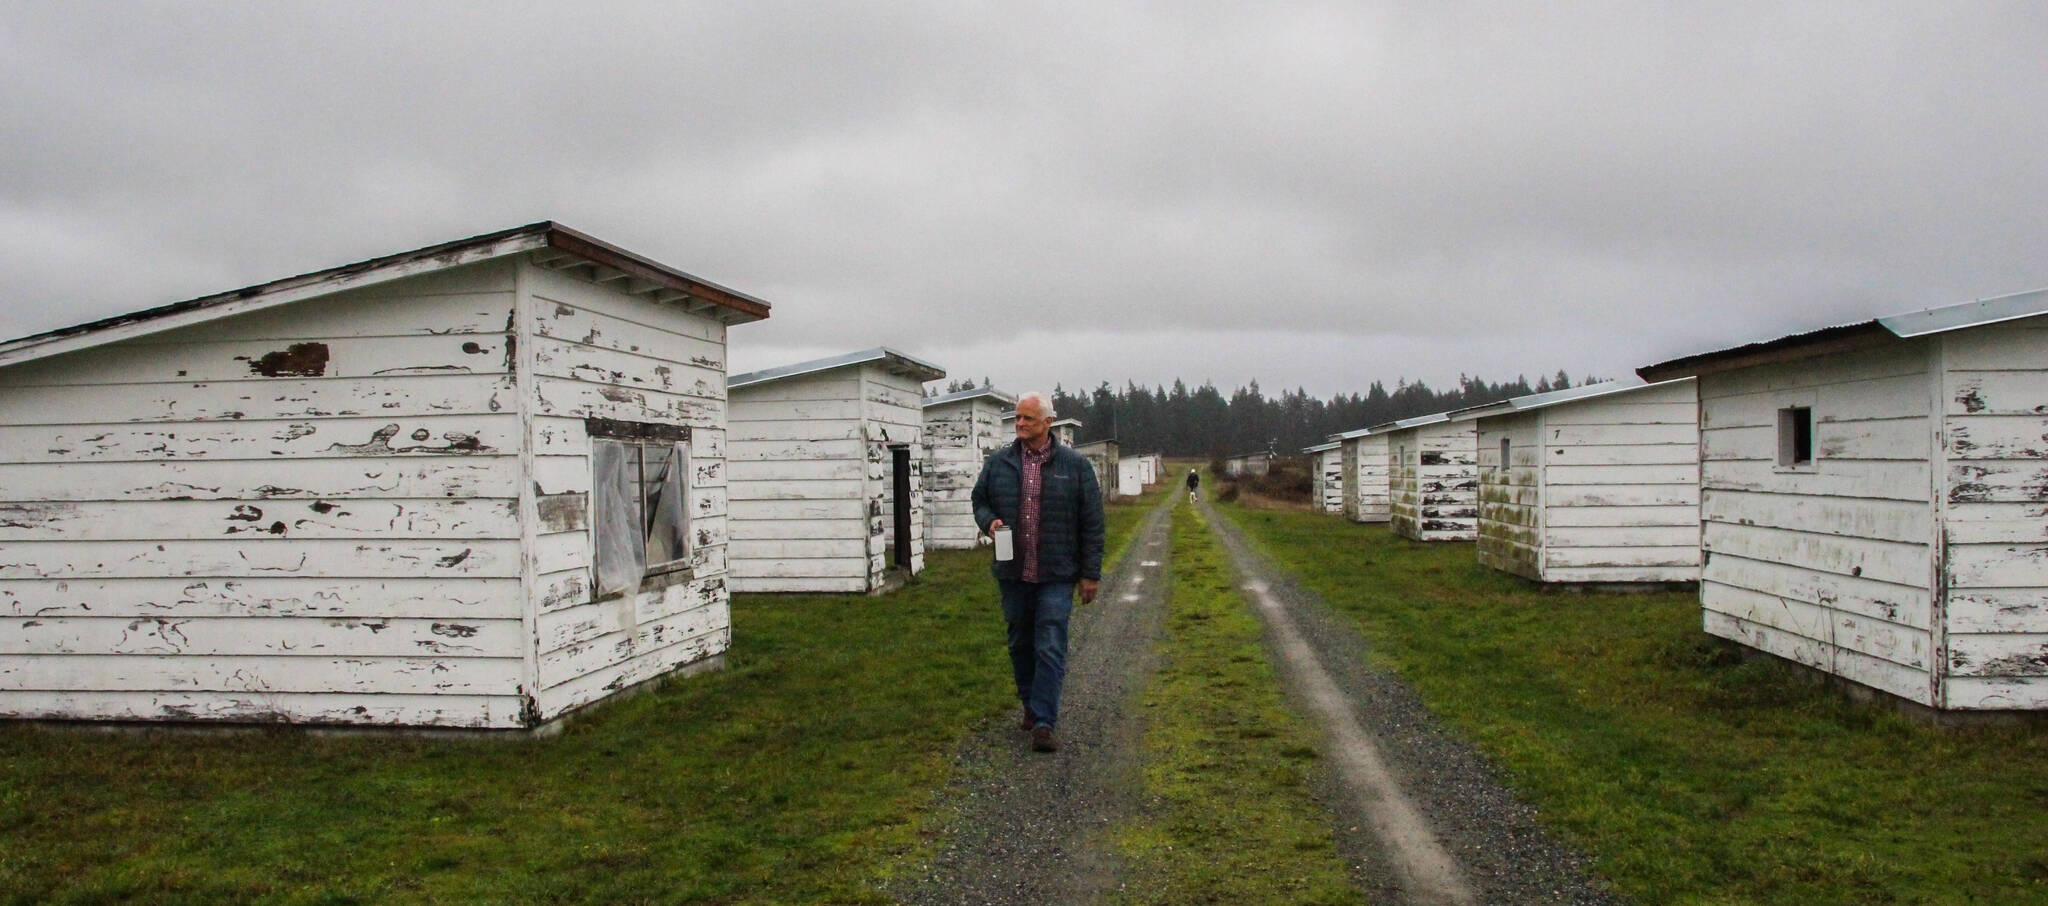 Robert Pelant walks by the former brooder houses for pheasant chicks. (Photo by Luisa Loi)